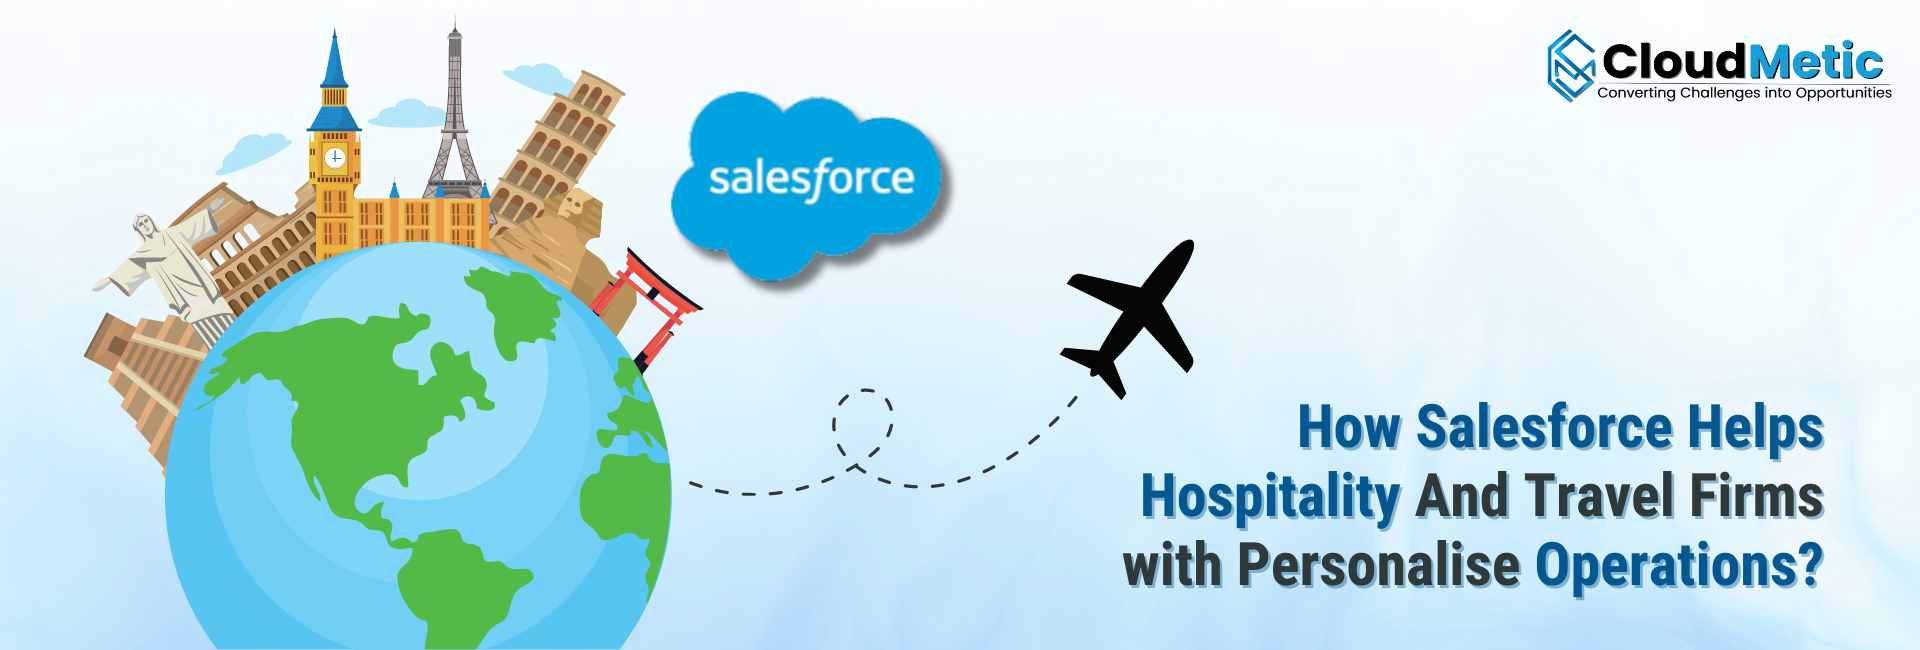 How Salesforce Helps Hospitality And Travel Firms with Personalize Operations?